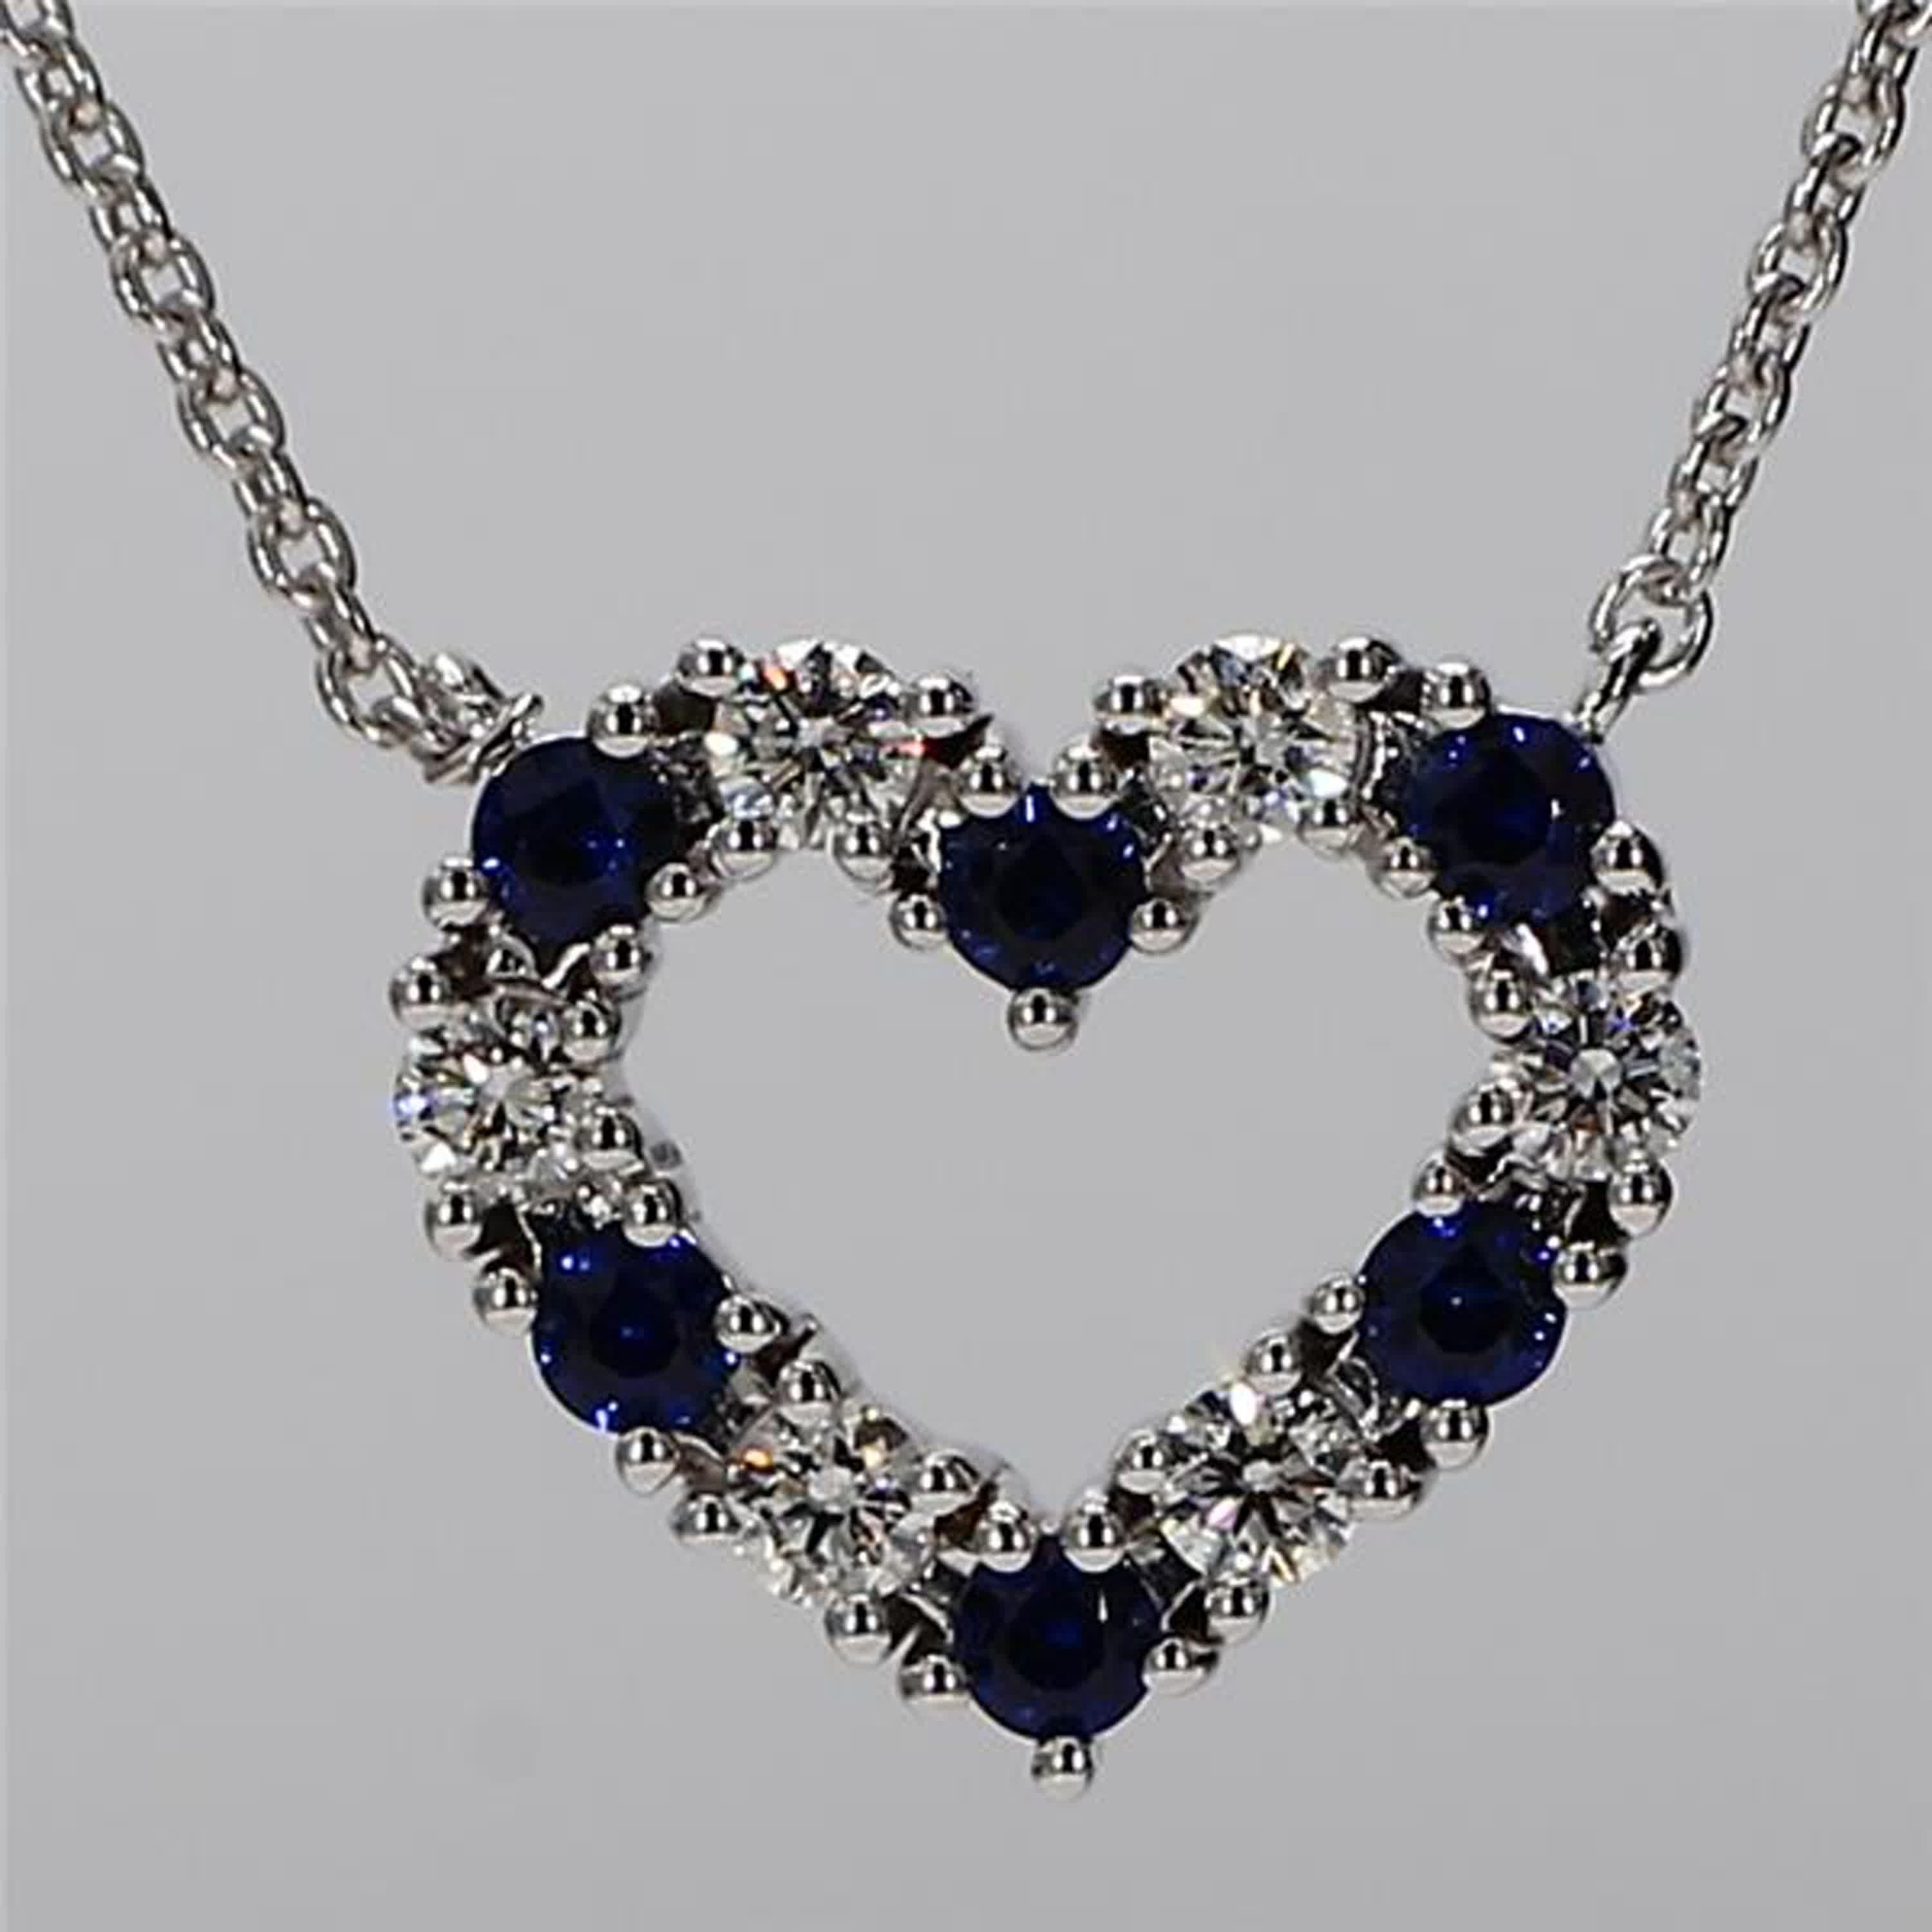 RareGemWorld's classic sapphire pendant. Mounted in a beautiful 18K White Gold setting with a natural round cut blue sapphires complimented by natural round cut white diamond melee in a beautiful heart-shape. This pendant is guaranteed to impress